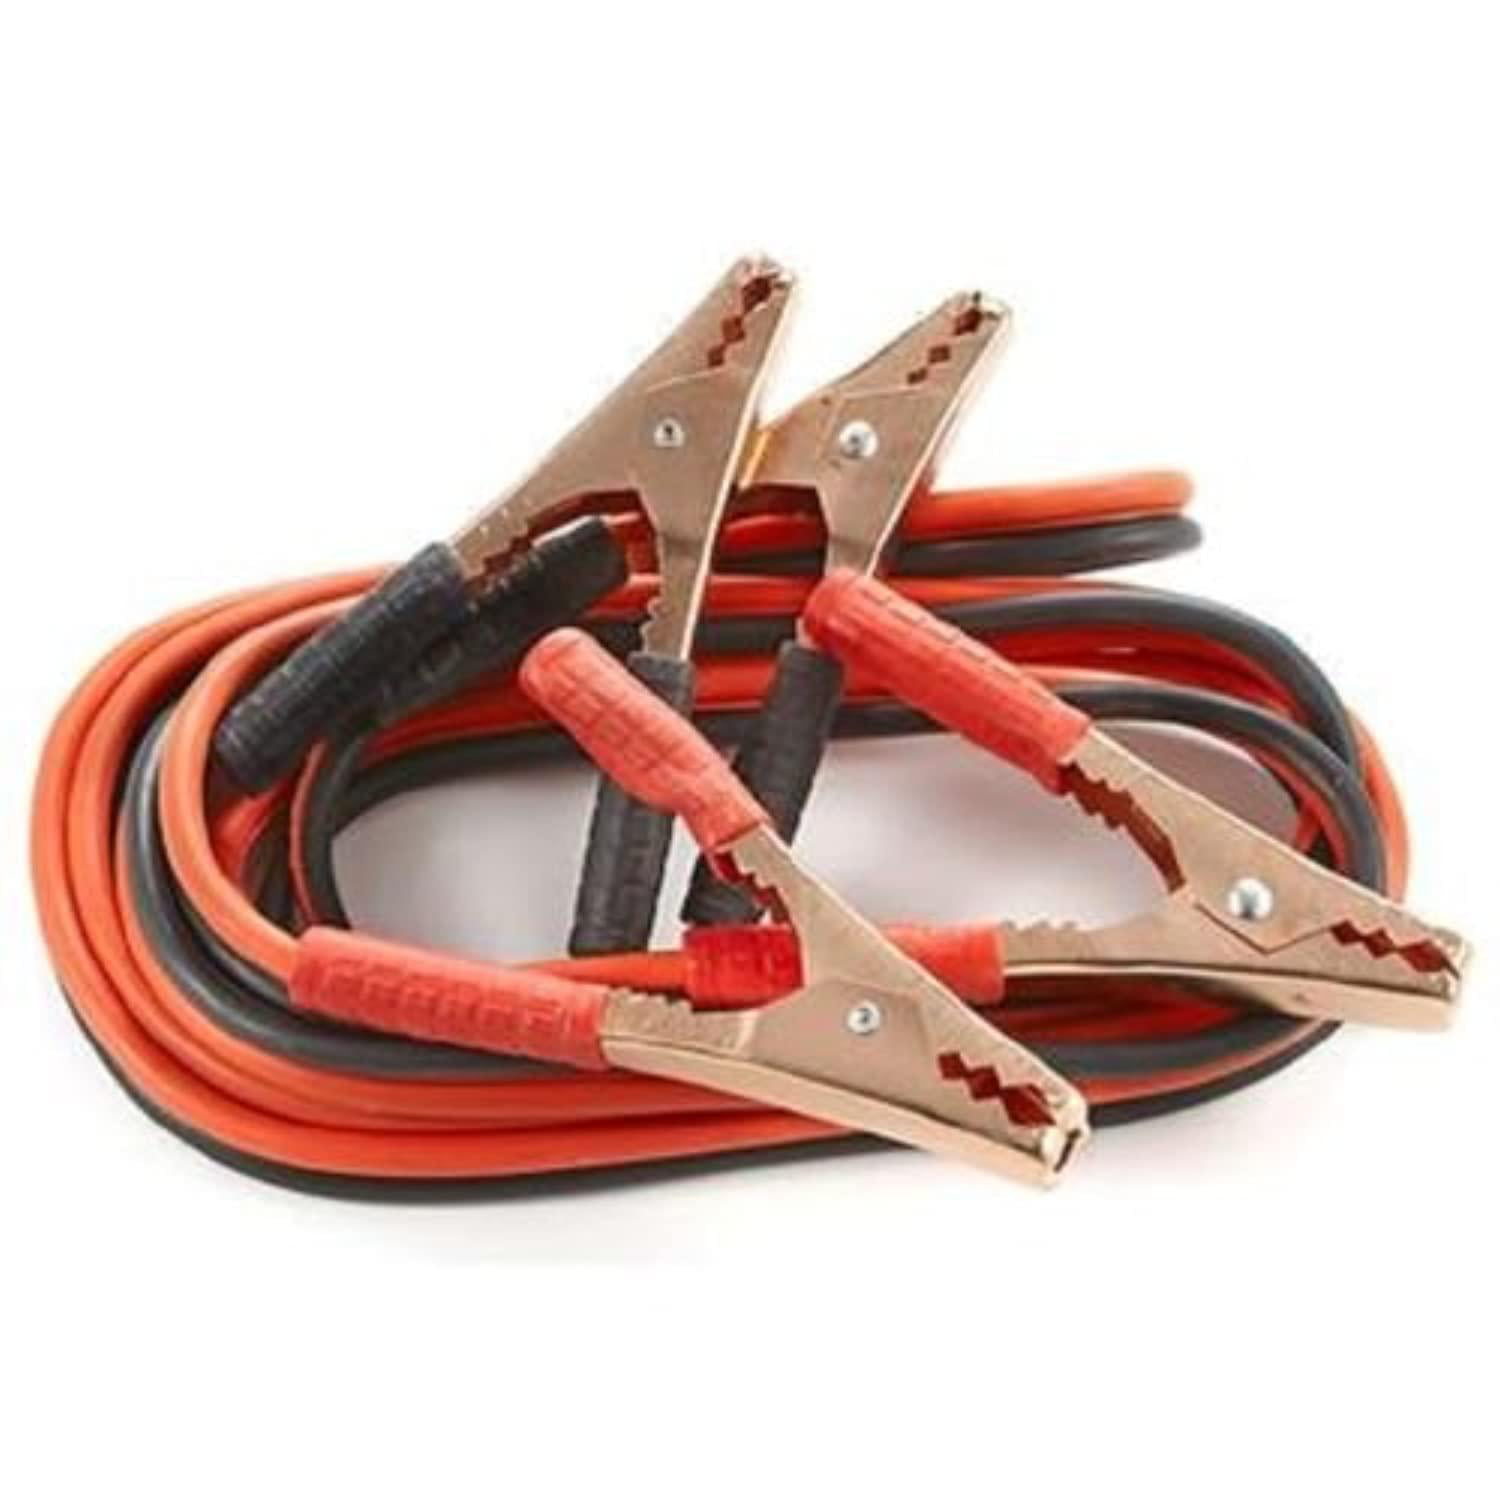 Details about   HEAVY DUTY 12FT 10GA BOOSTER JUMPER CABLE EMERGENCY BATTERY START CAR/MOTORCYCLE 